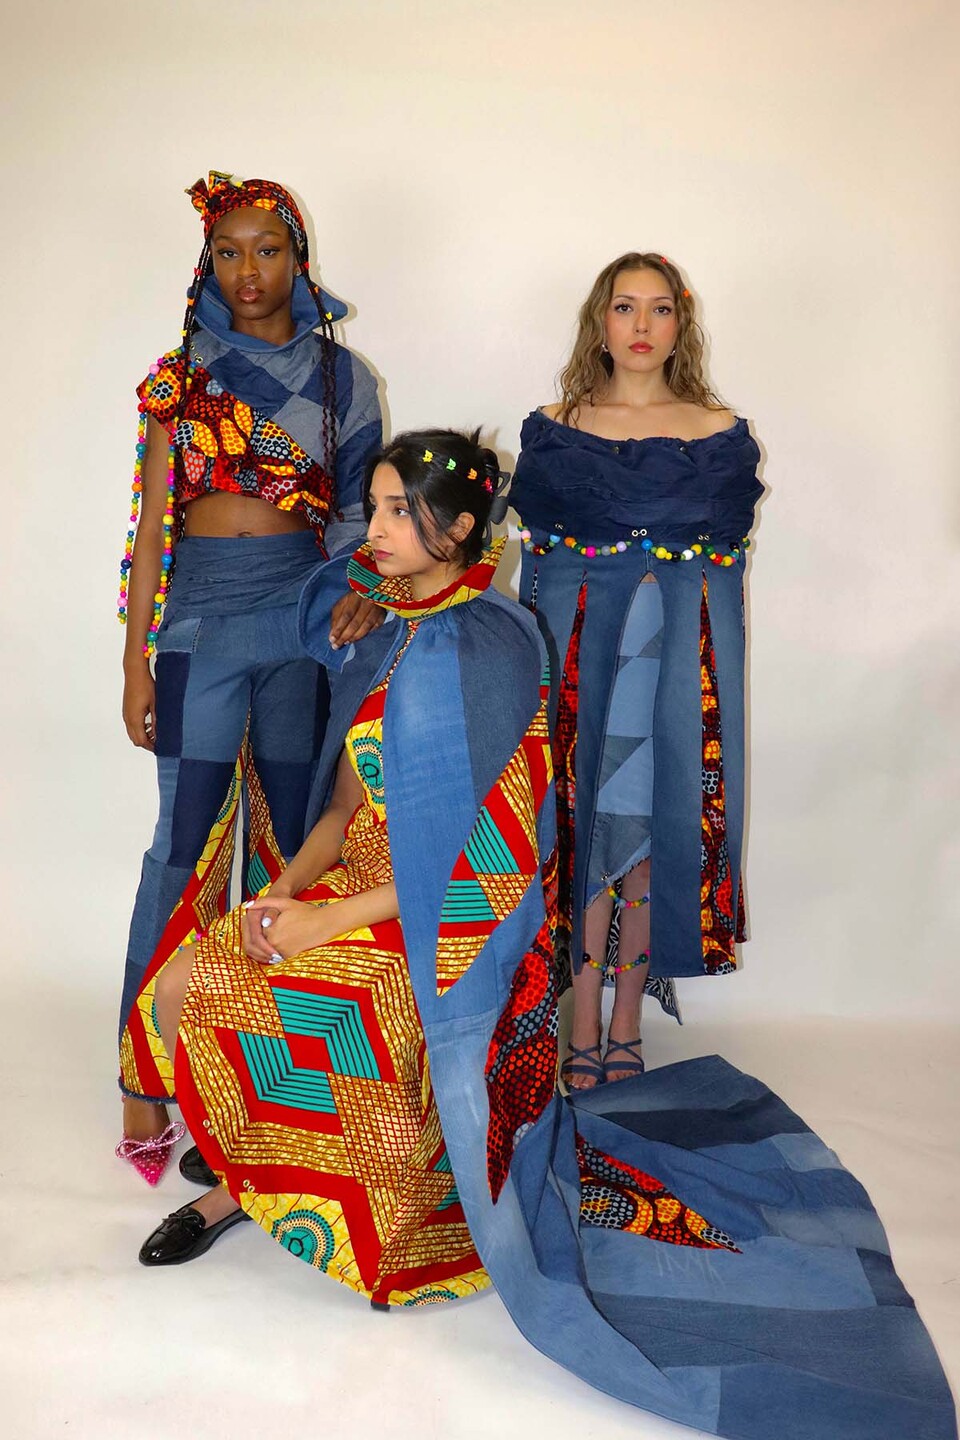 Three women model two African print dresses, and top and trousers in blue, red, brown, orange and teal with upcycled denim sections and beading from 'The Southside' by Chrystal Dube.